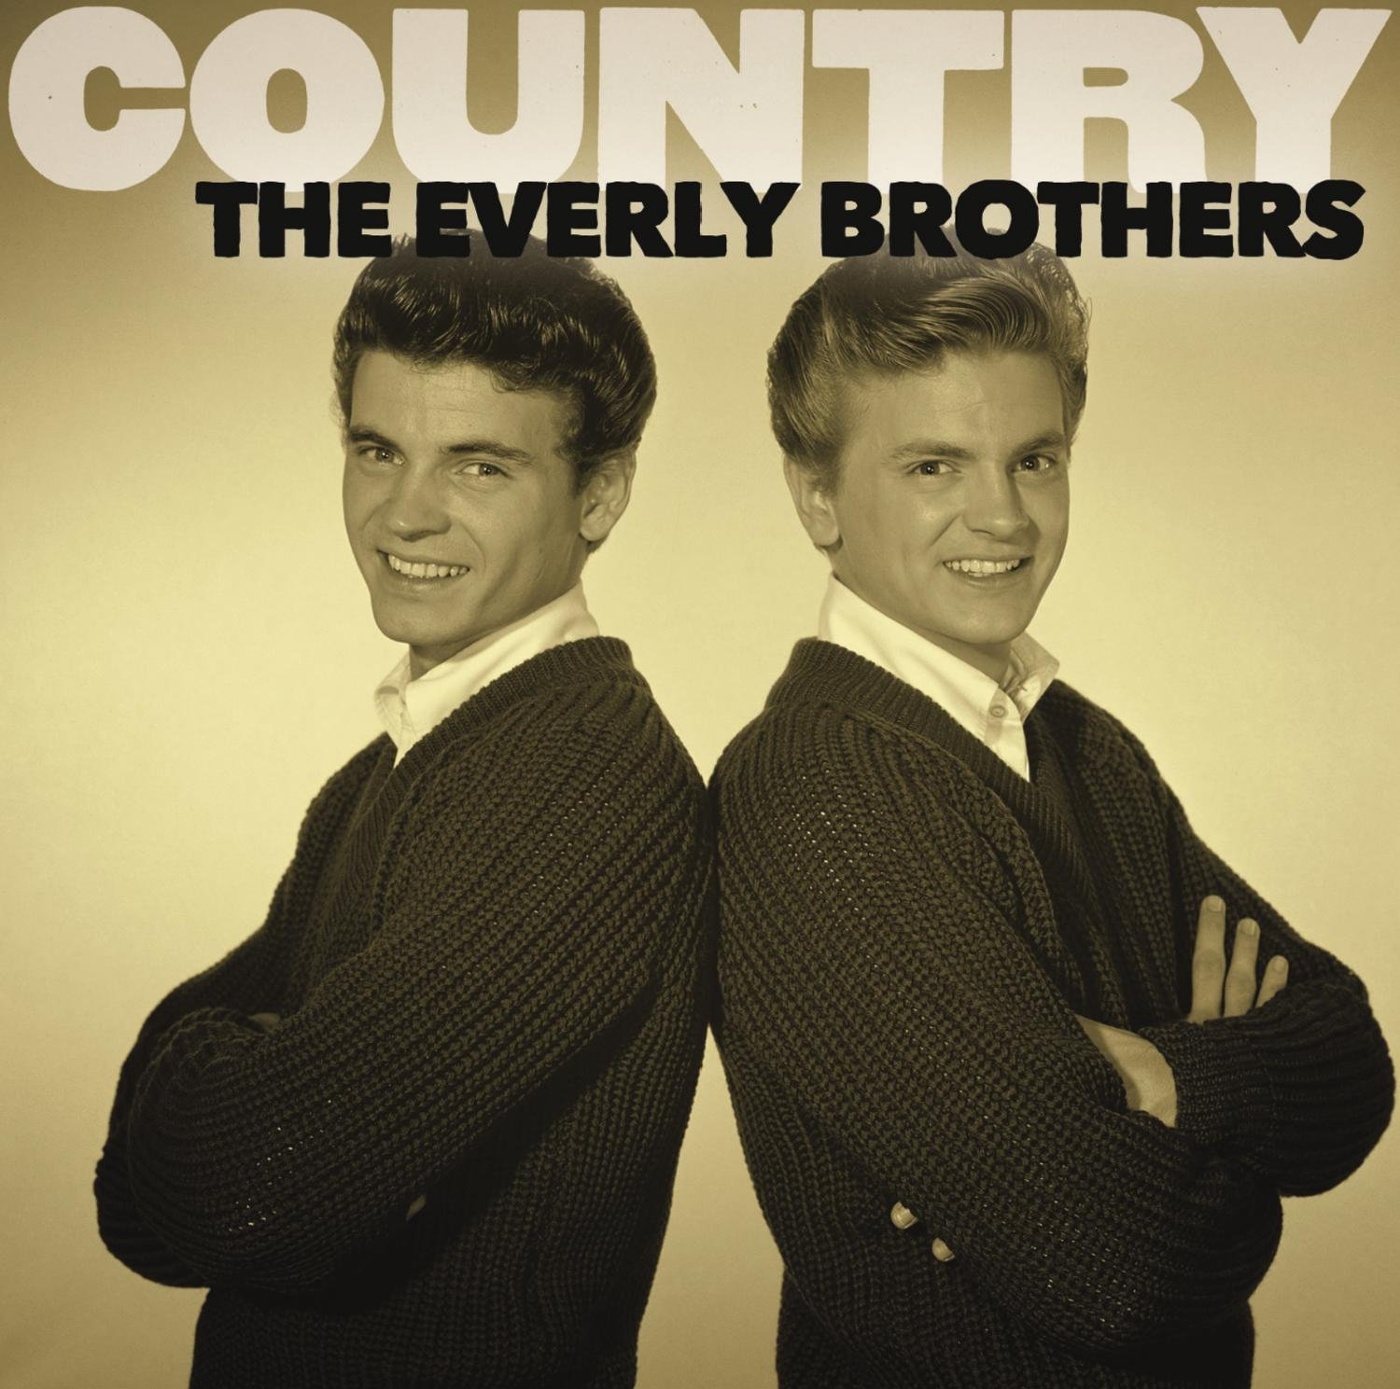 Brothers country. Everly brothers roots (1968). Группа the Everly brothers. Everly brothers roots. Everly brothers crying.